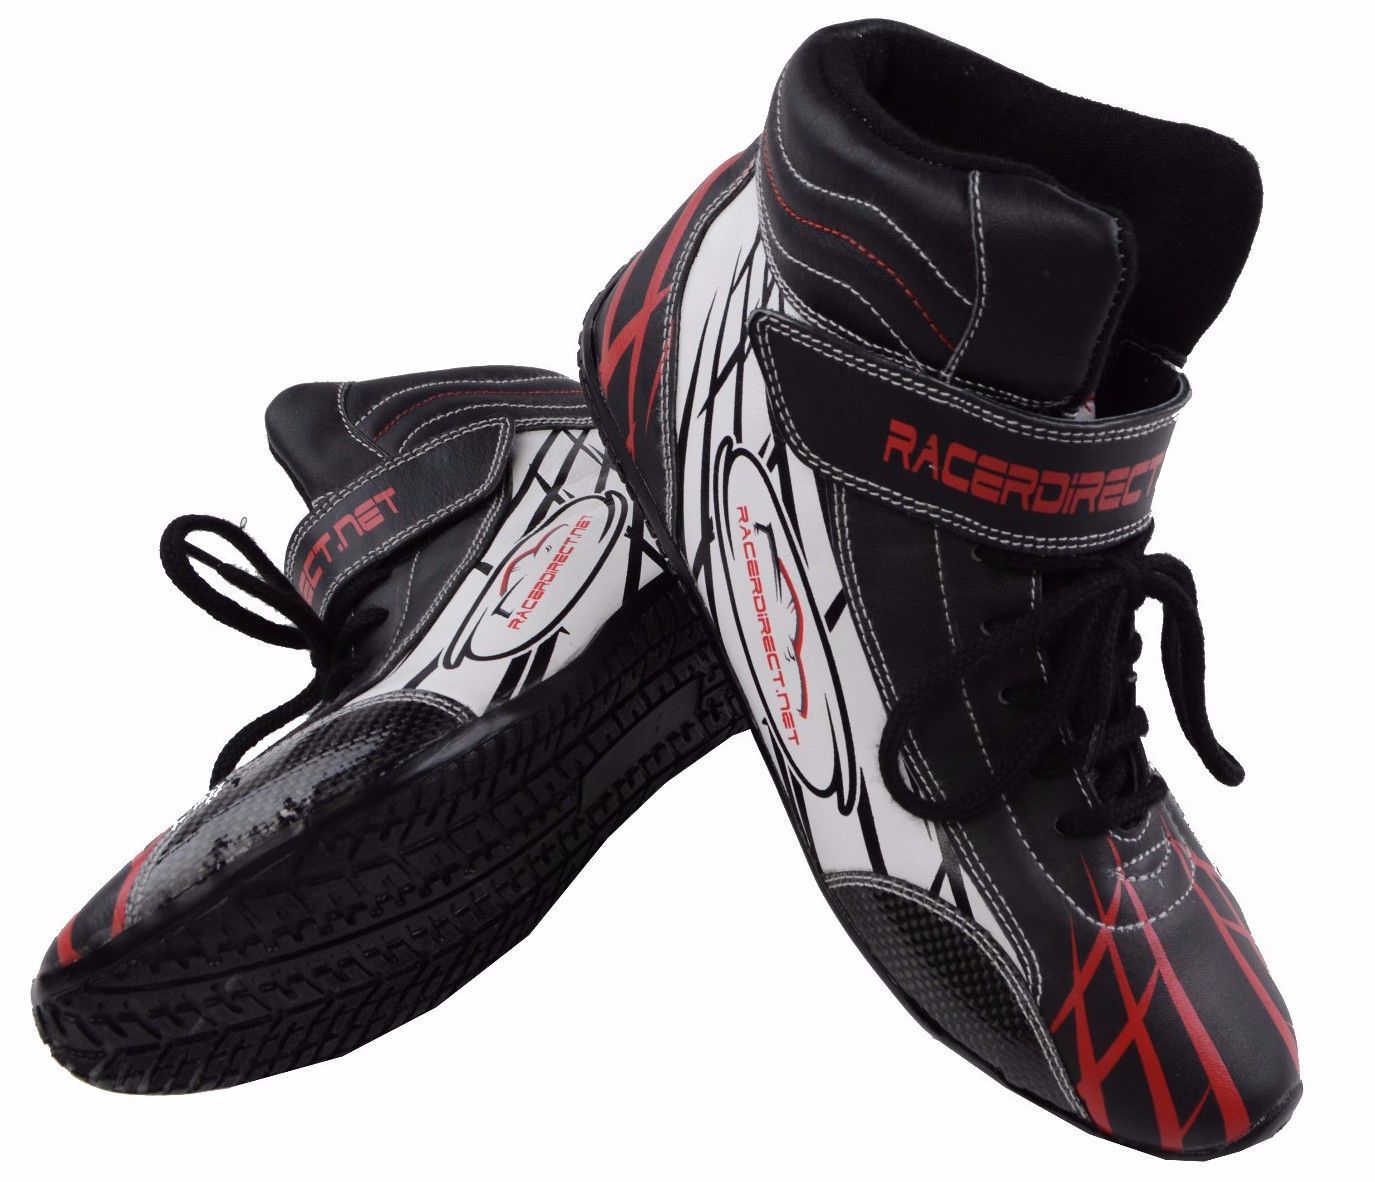 RACERDIRECT RACING SHOES SFI 3.3 LEATHER MID TOP SIZE KIDS